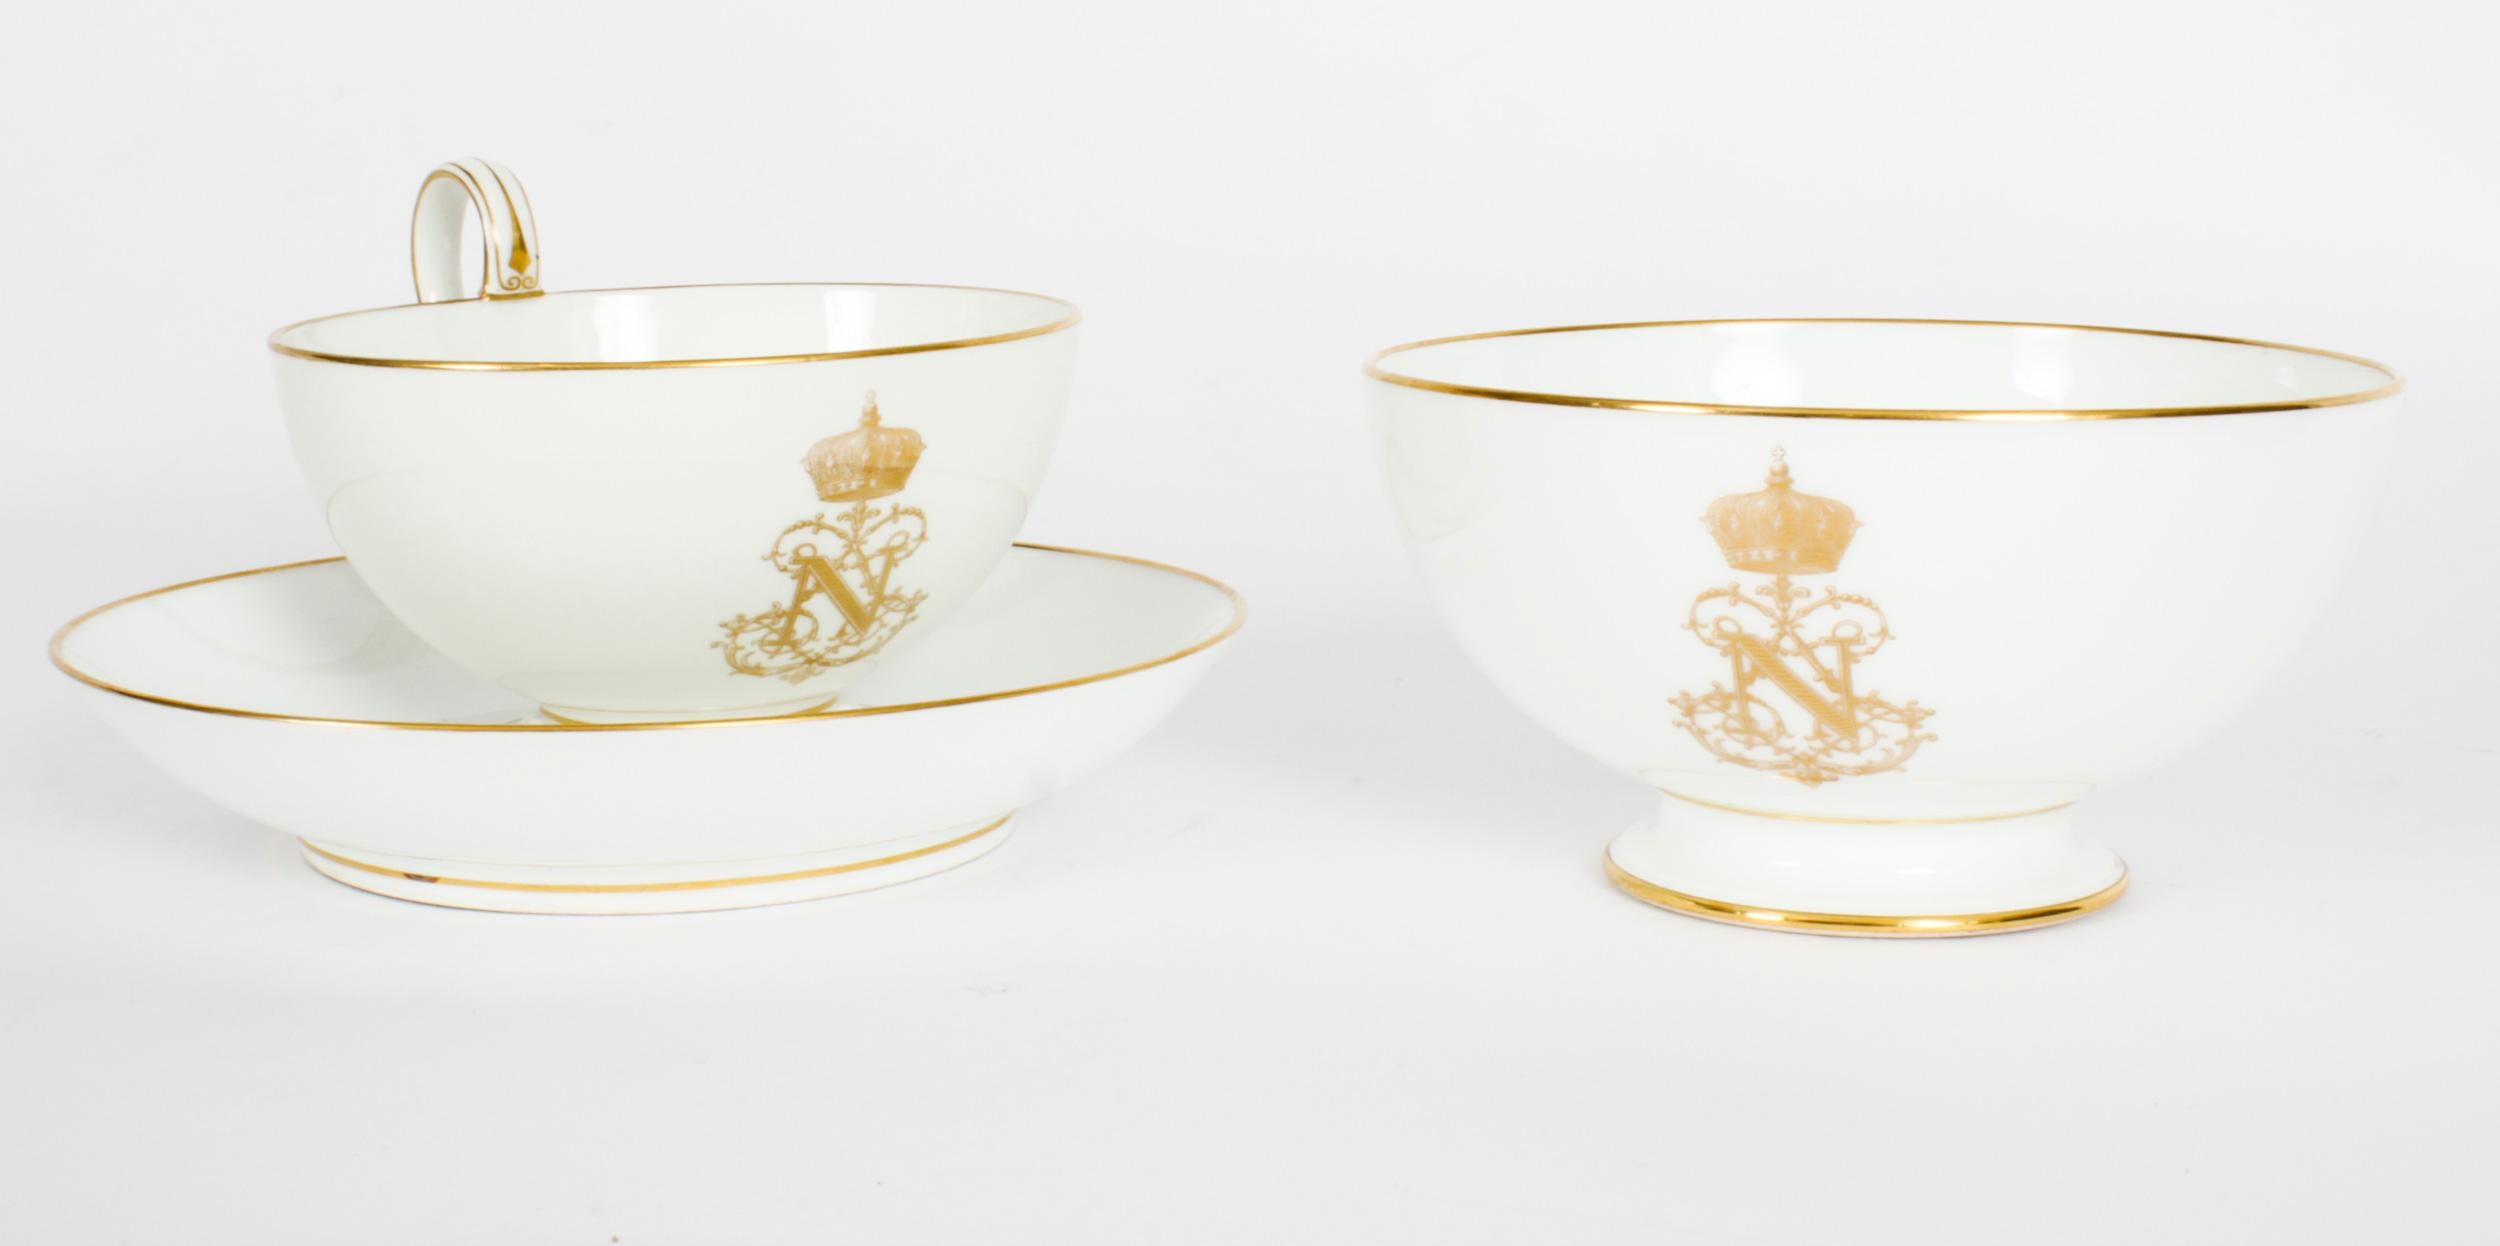 This is an important fine Sèvres porcelain breafast cup and saucer with a footed sugar bowl dating from the mid 19th Century.
 
The cup saucer & bowl all feature the gilt crowned N cipher with gilt line borders on a white ground and the undersides